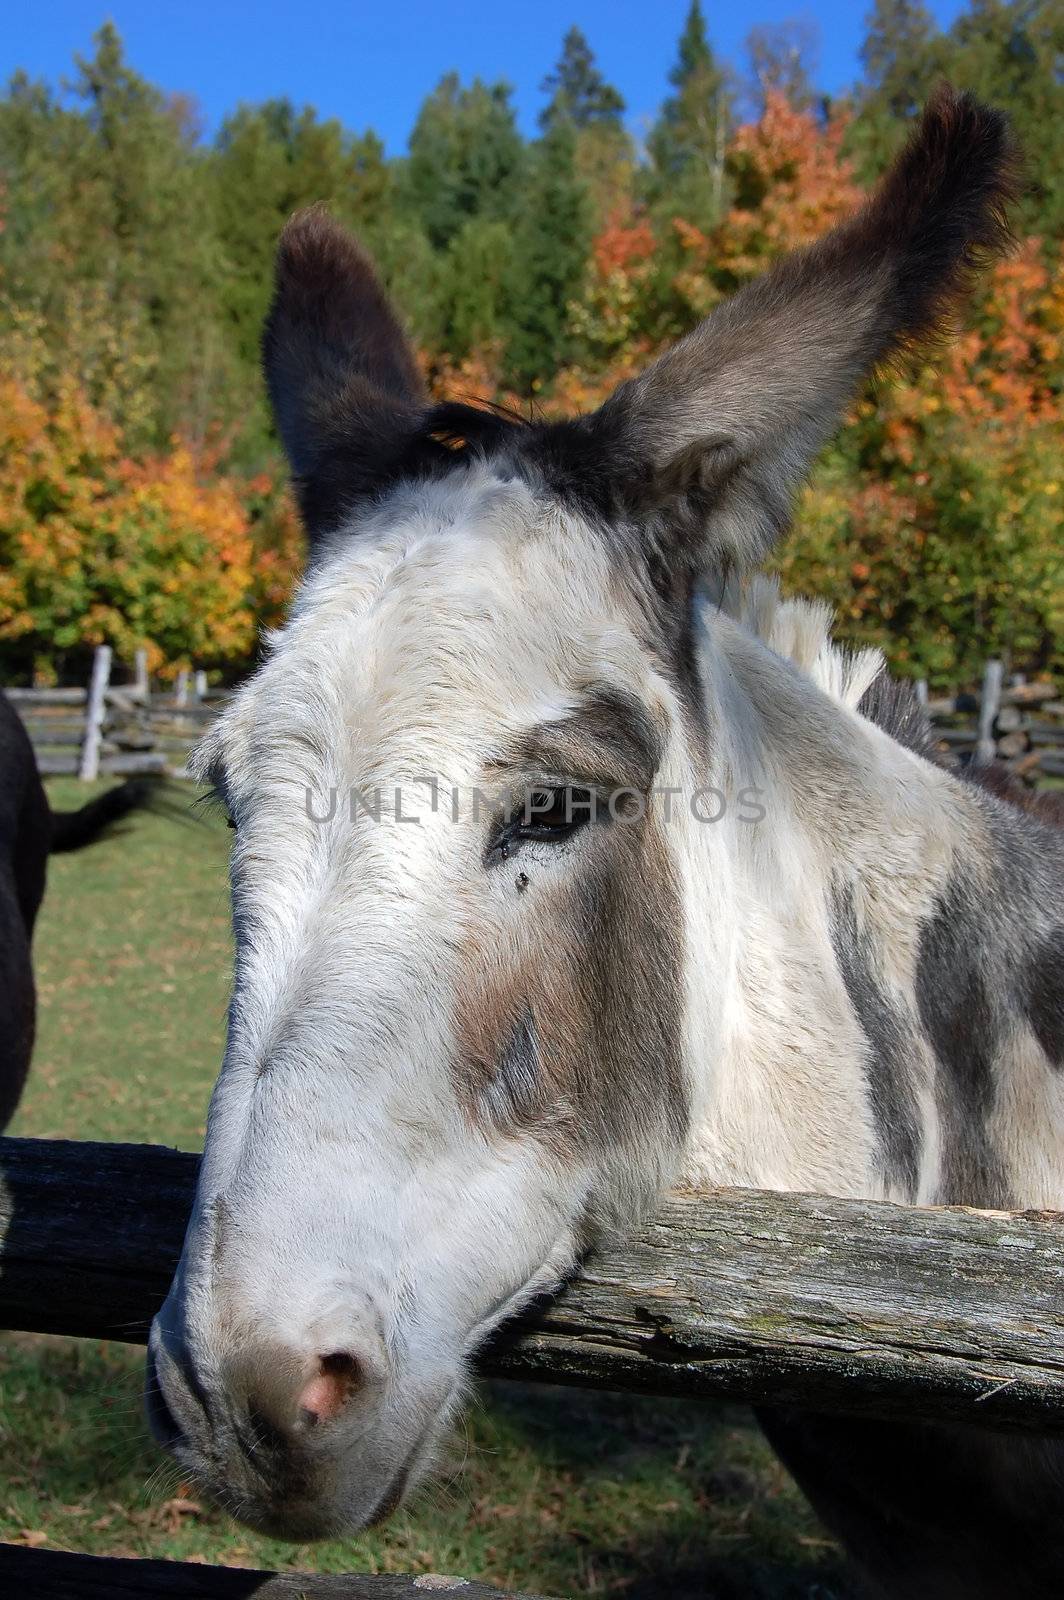 Close-up picture of a donkey with a fall background